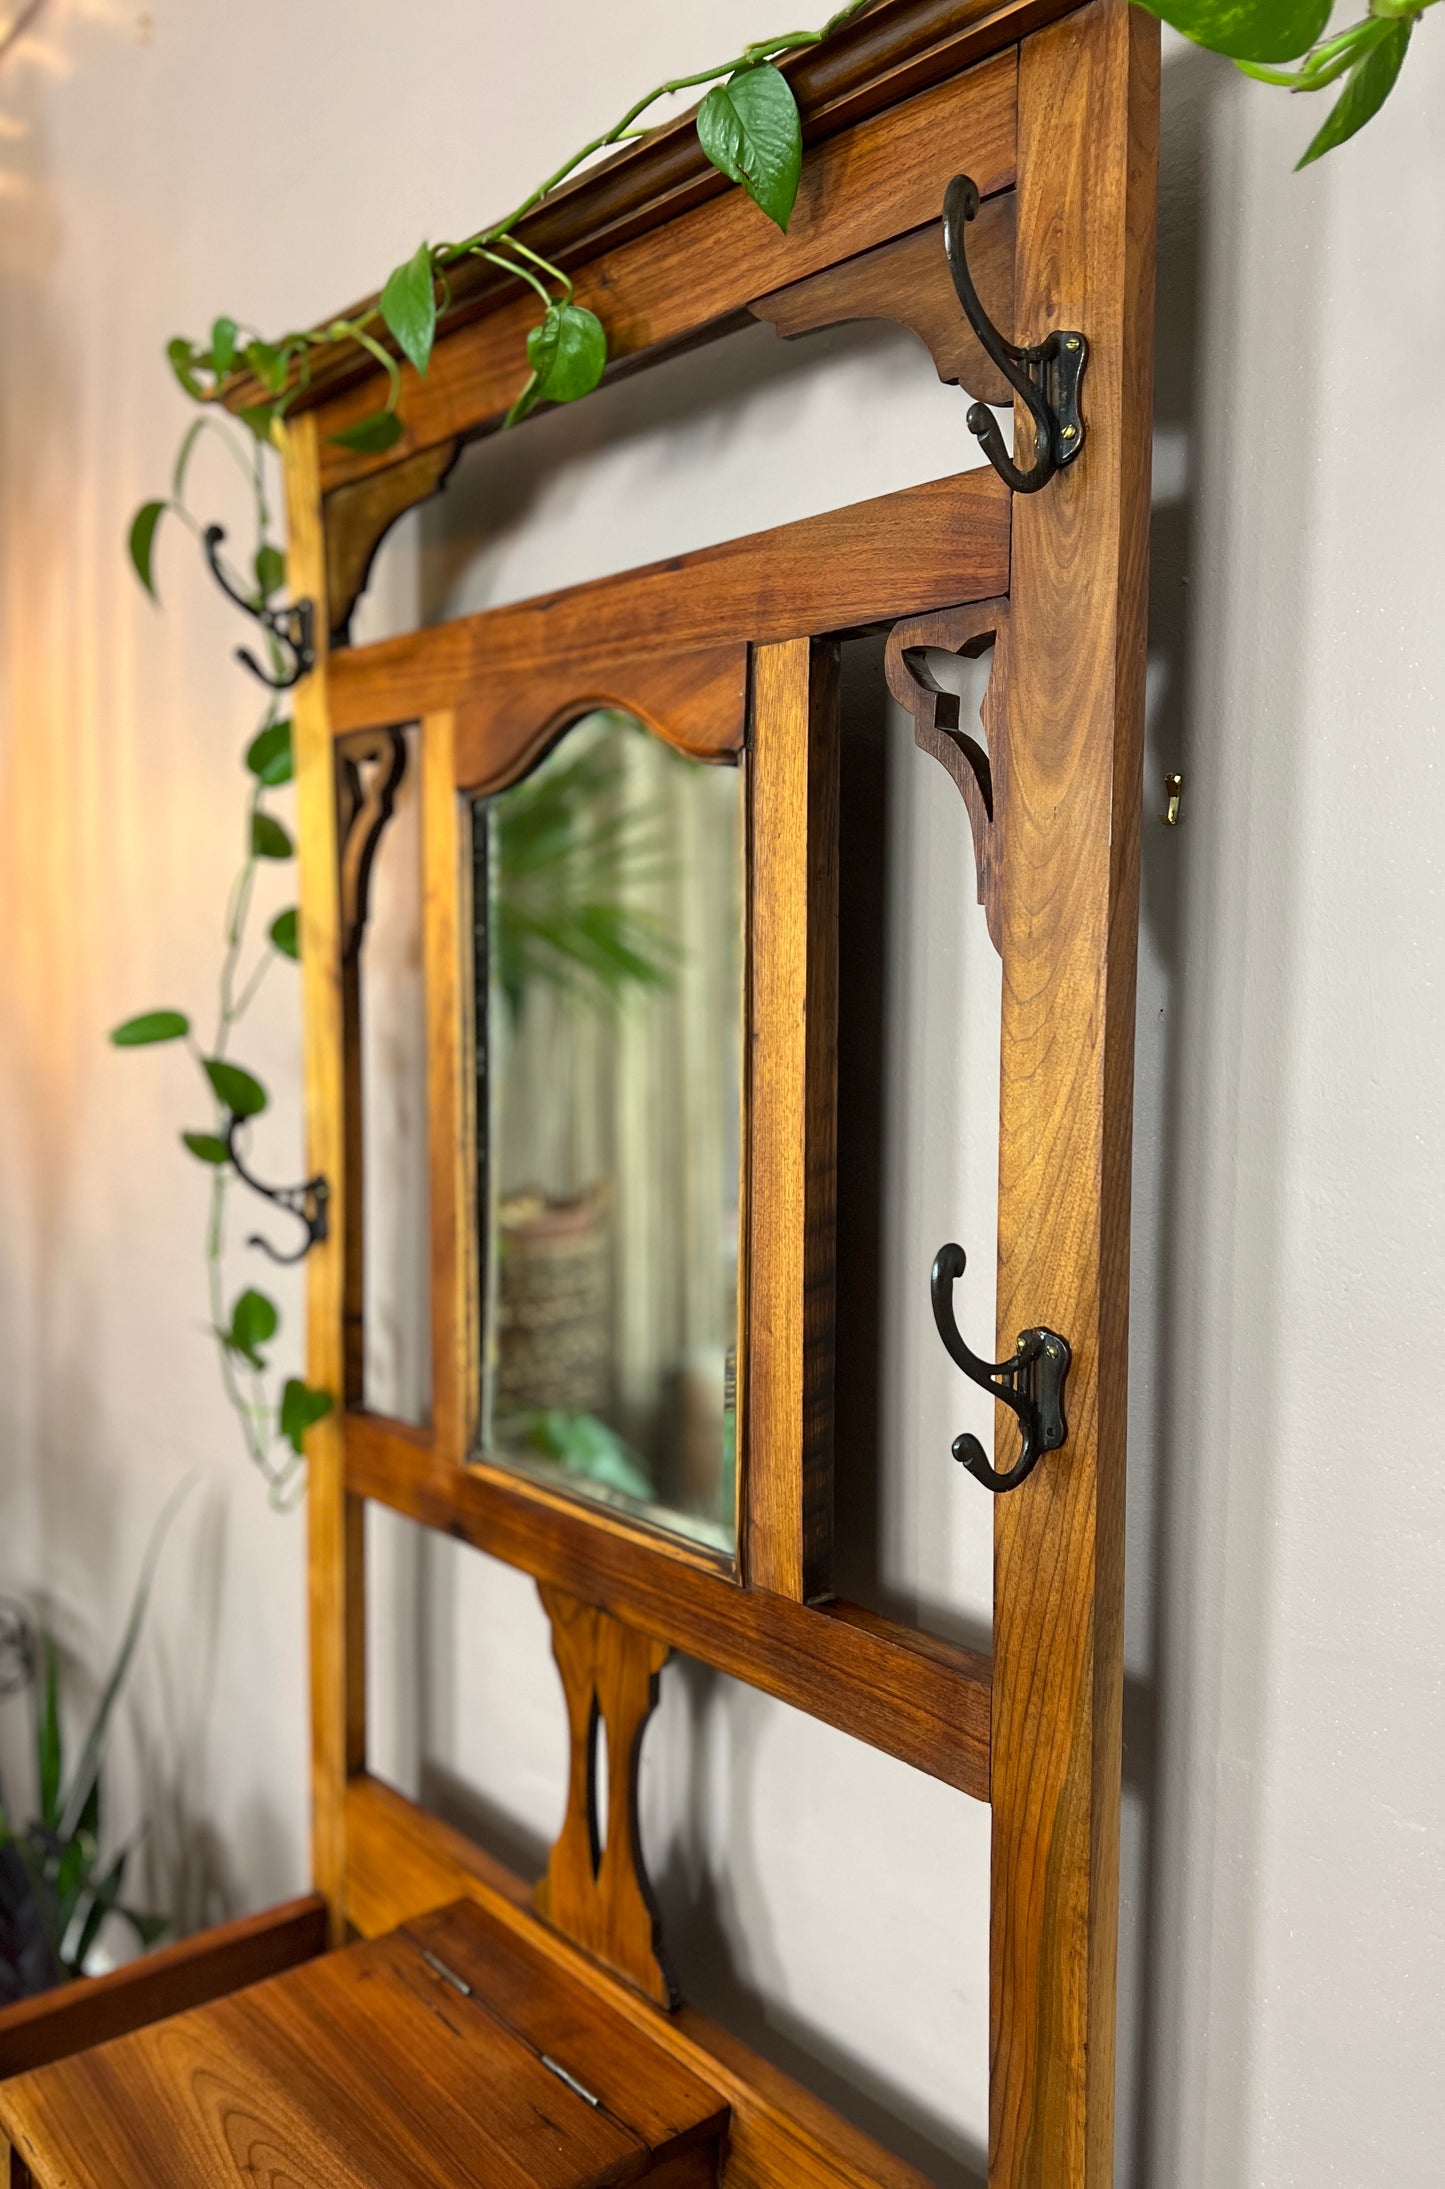 The Antique Hall Tree With Mirror